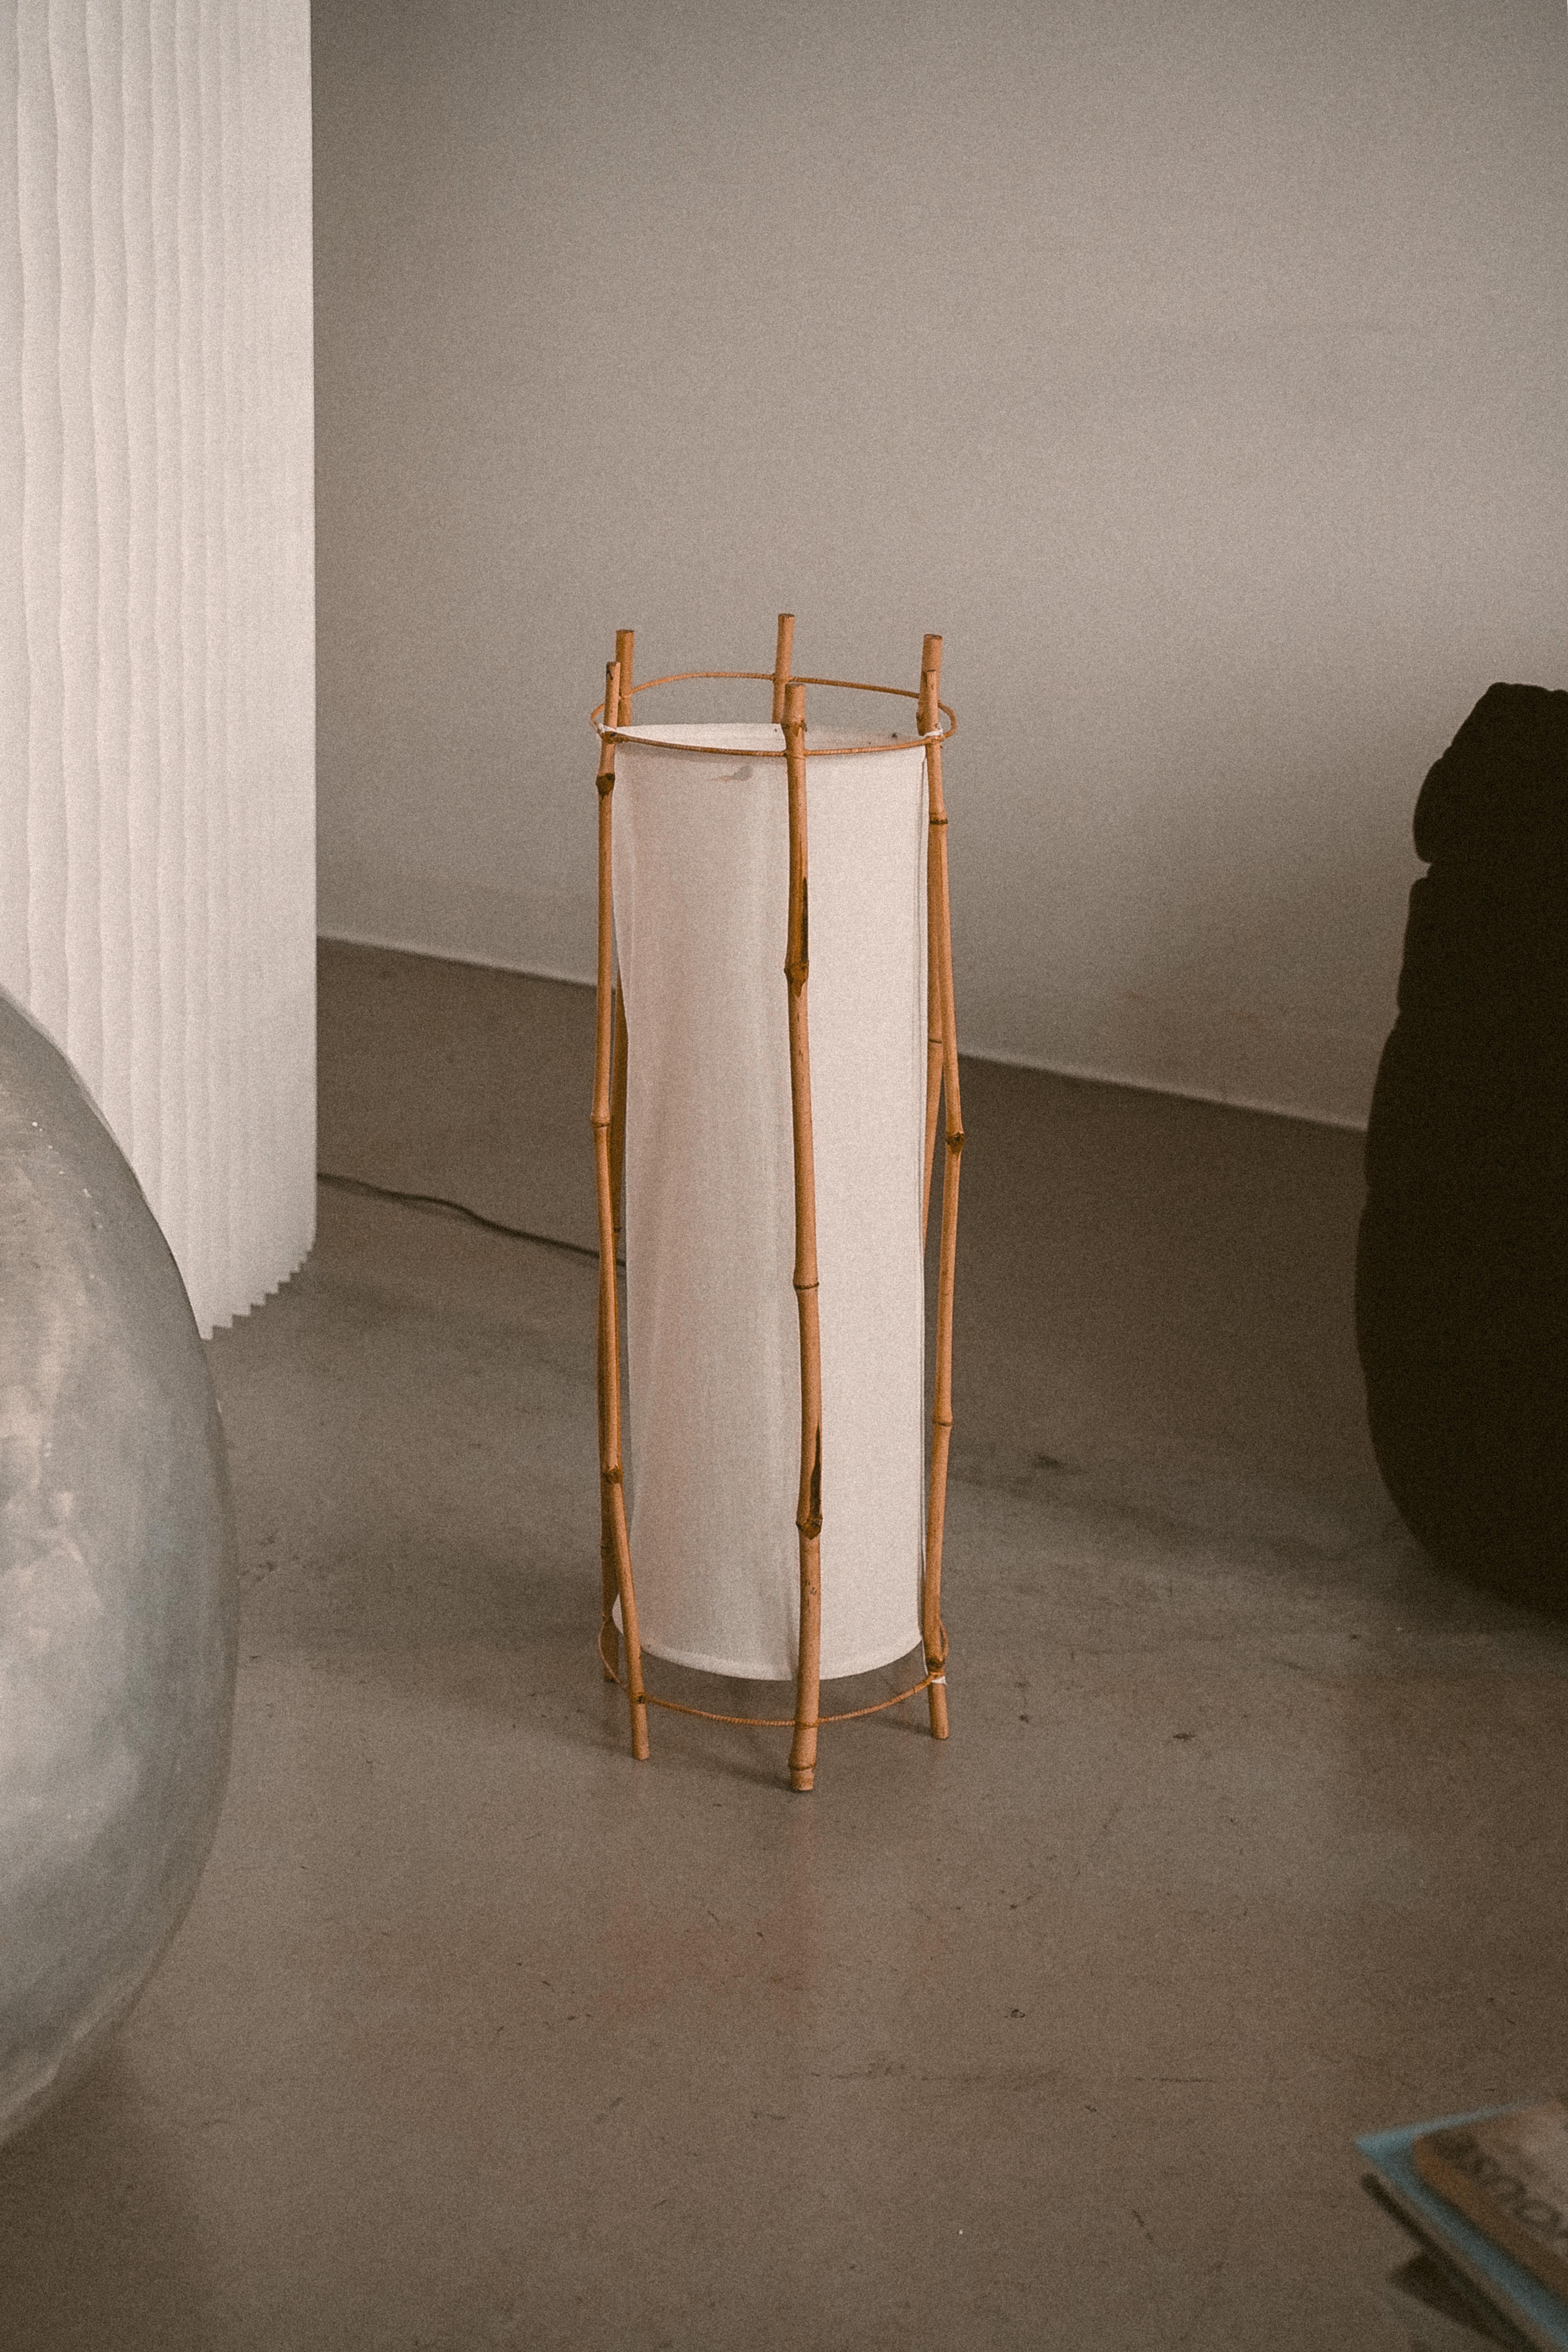 Cylindrical floor lamp in white cotton featuring structure in bamboo composed of six stems. Attributed to the French designer Louis Sognot. Coloured drops of staining on the inside of fabric on one side of the lamp shade, not shown in photos. Please